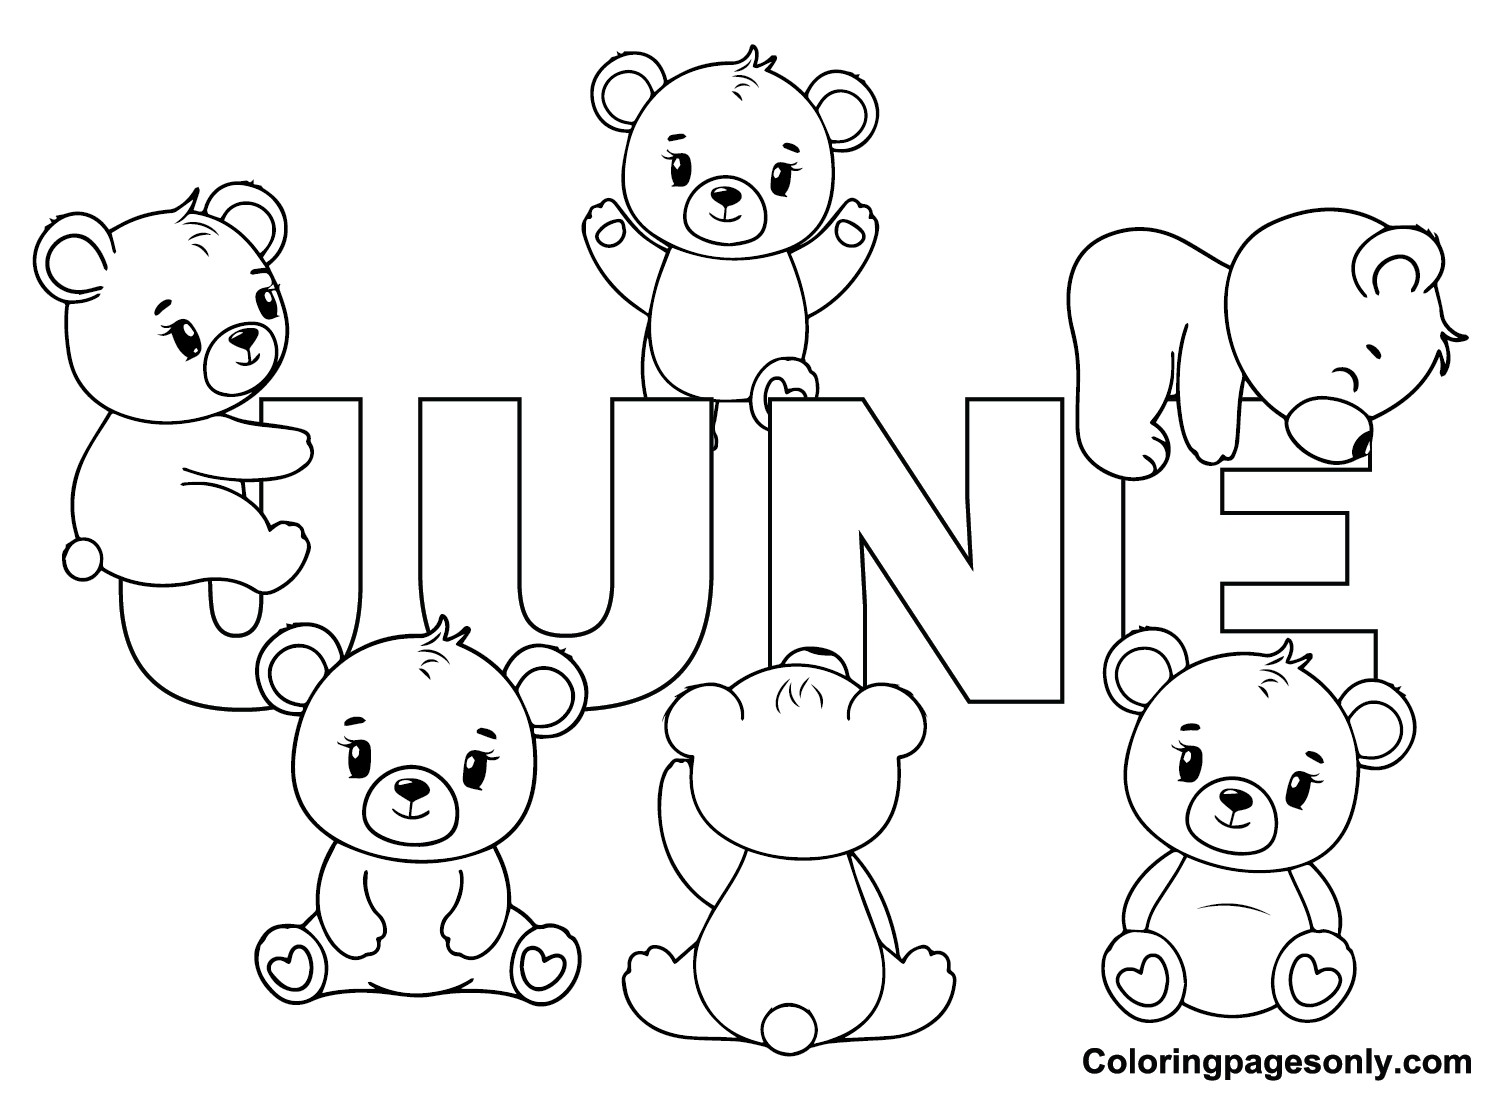 June Images Coloring Pages